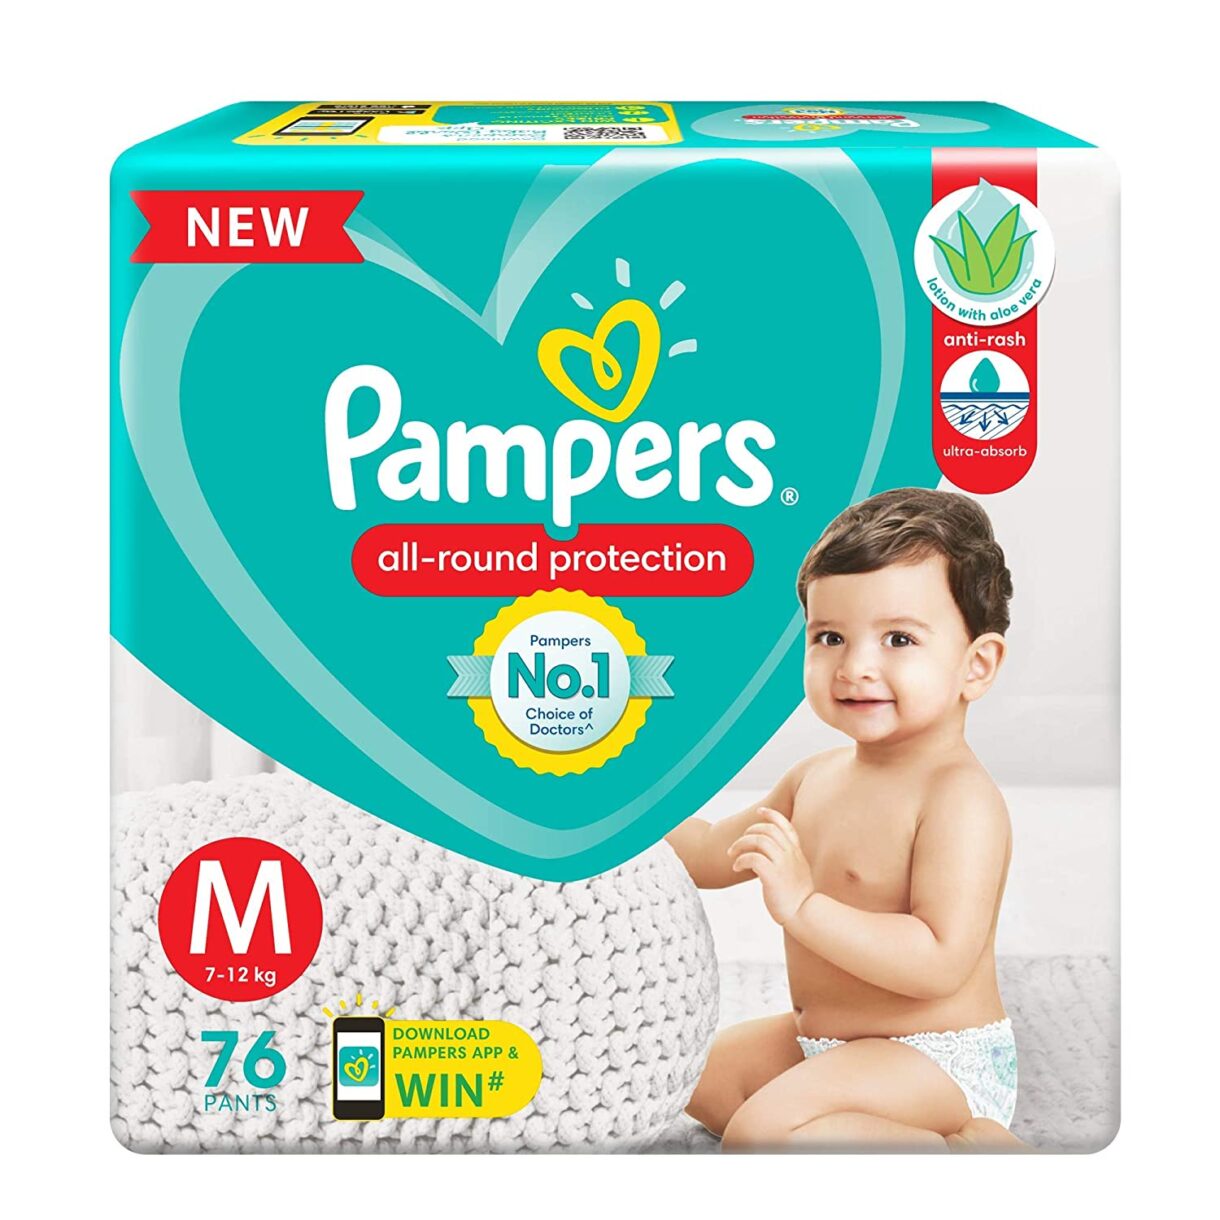 Pampers All round Protection Pants, Medium size baby diapers (MD) 76 Count,